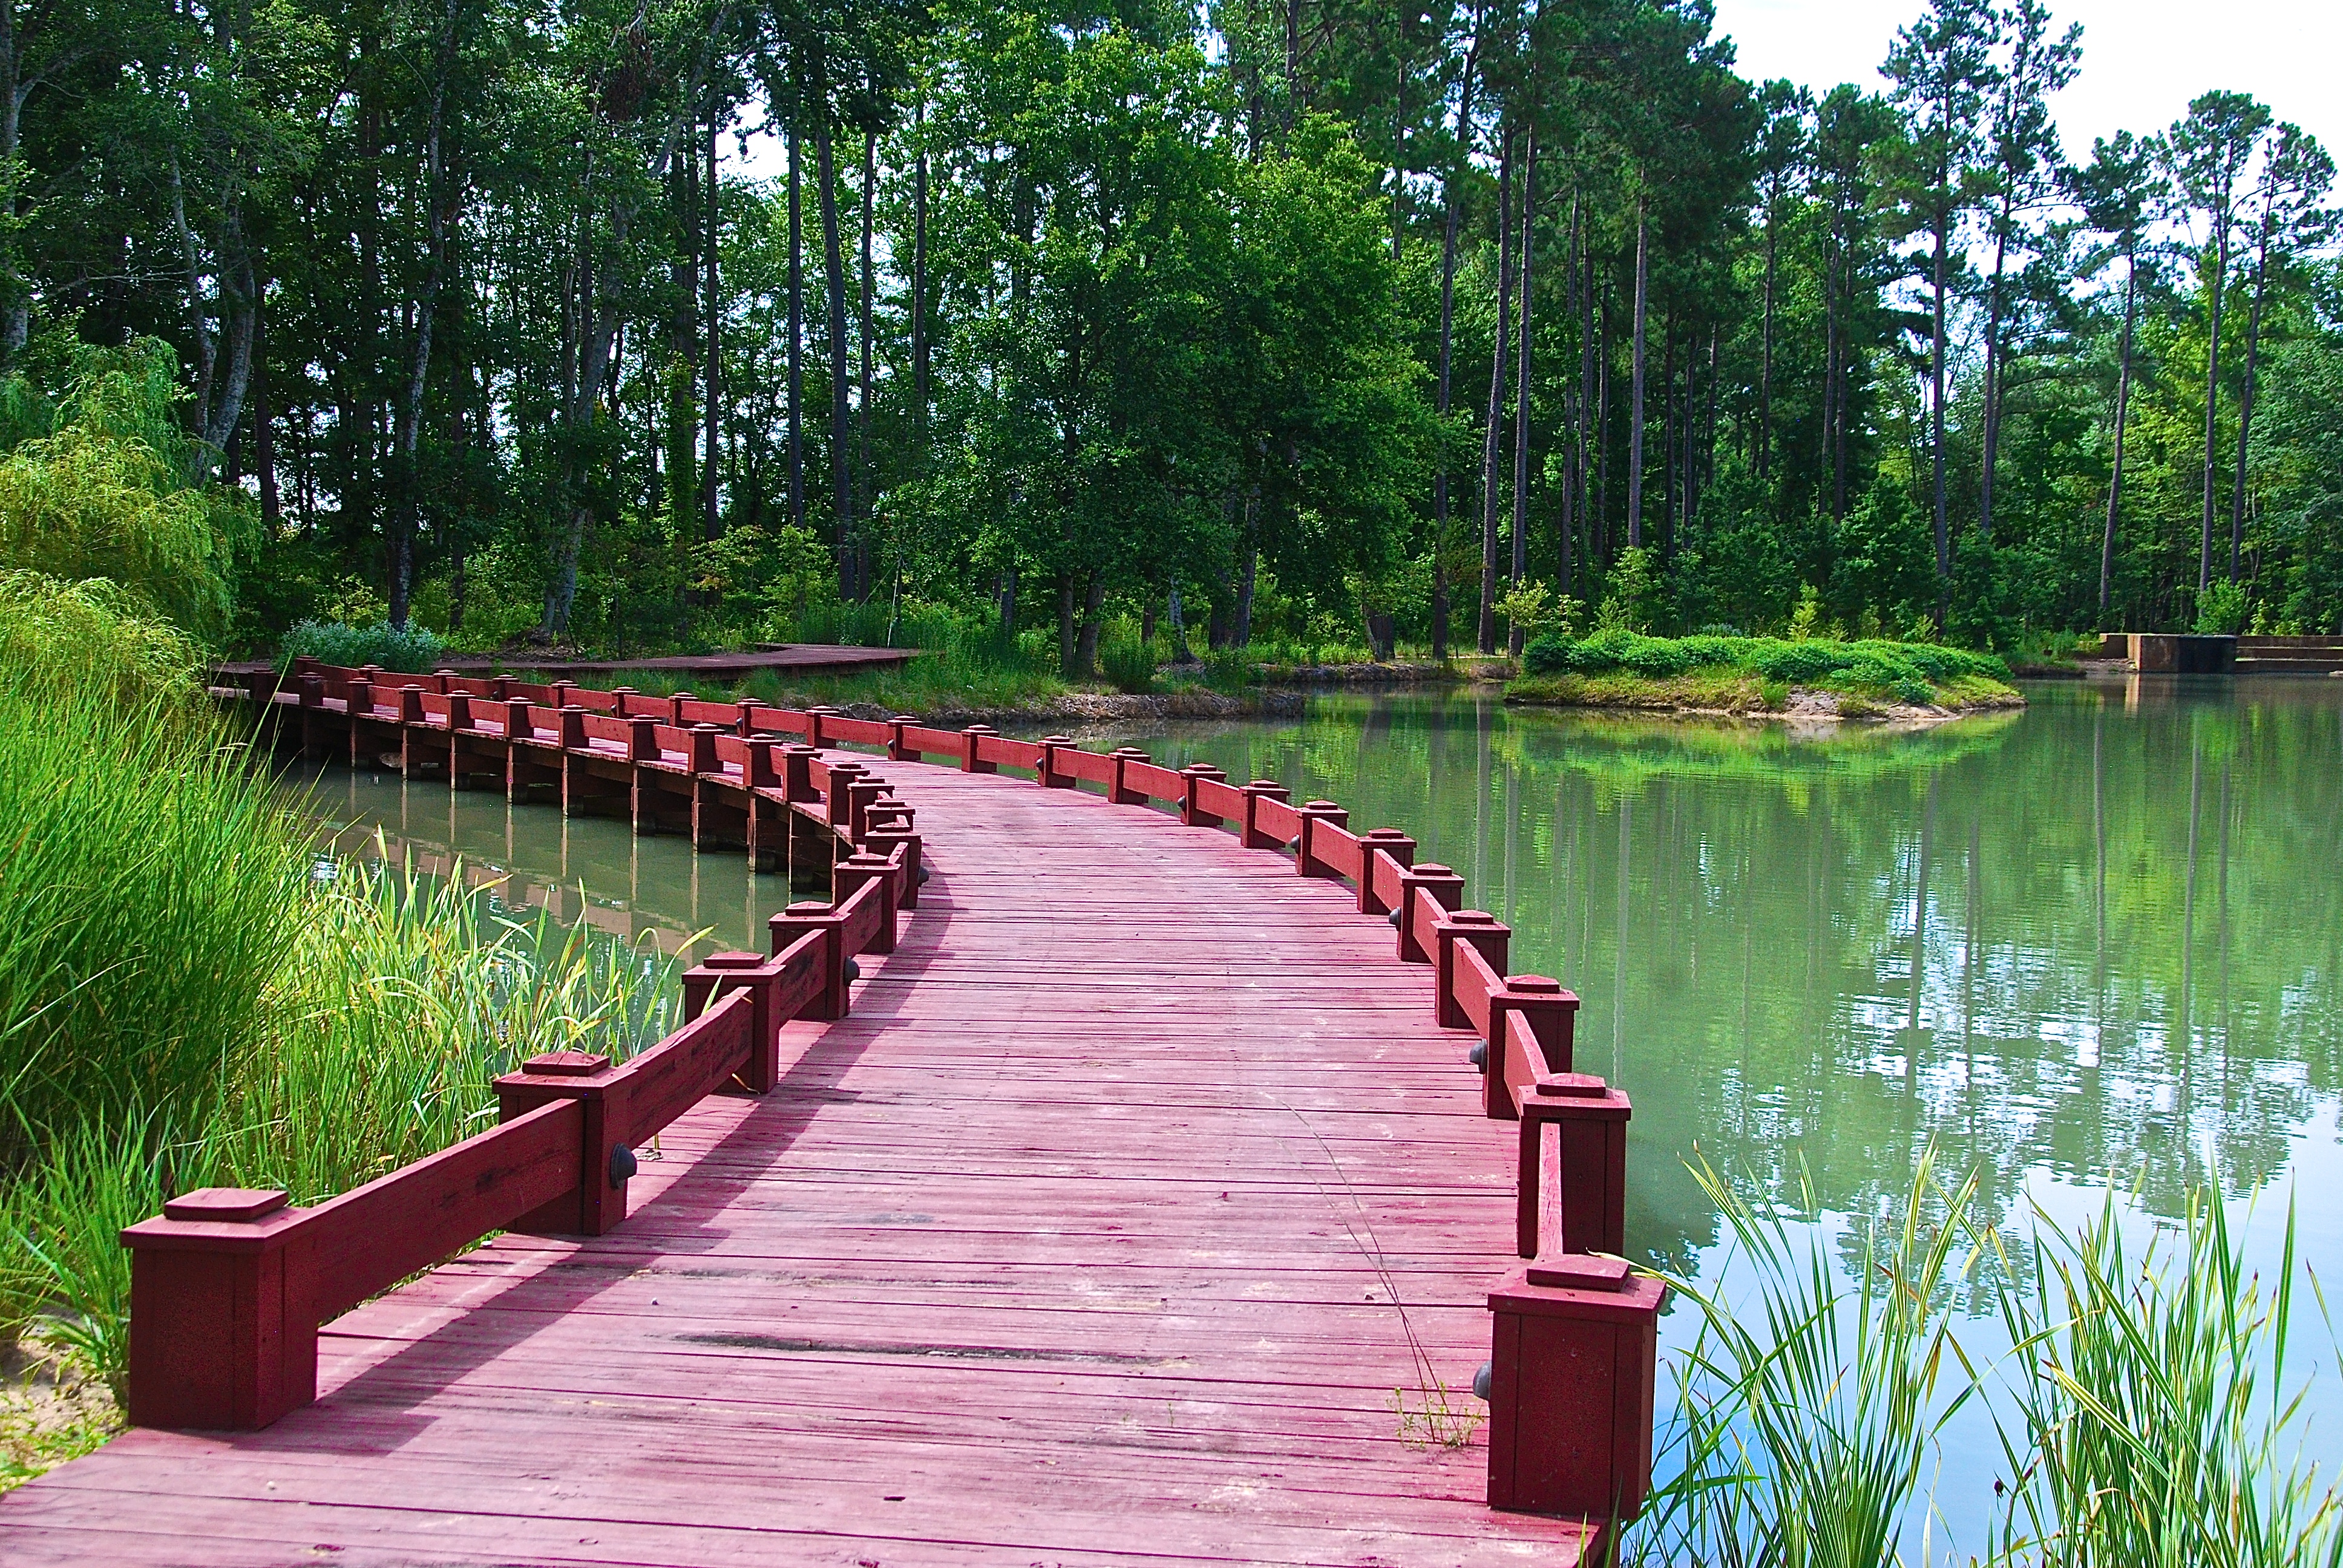 A boardwalk winds along the Swimming Pond, a serene spot in the garden surrounded by native grasses and pines.